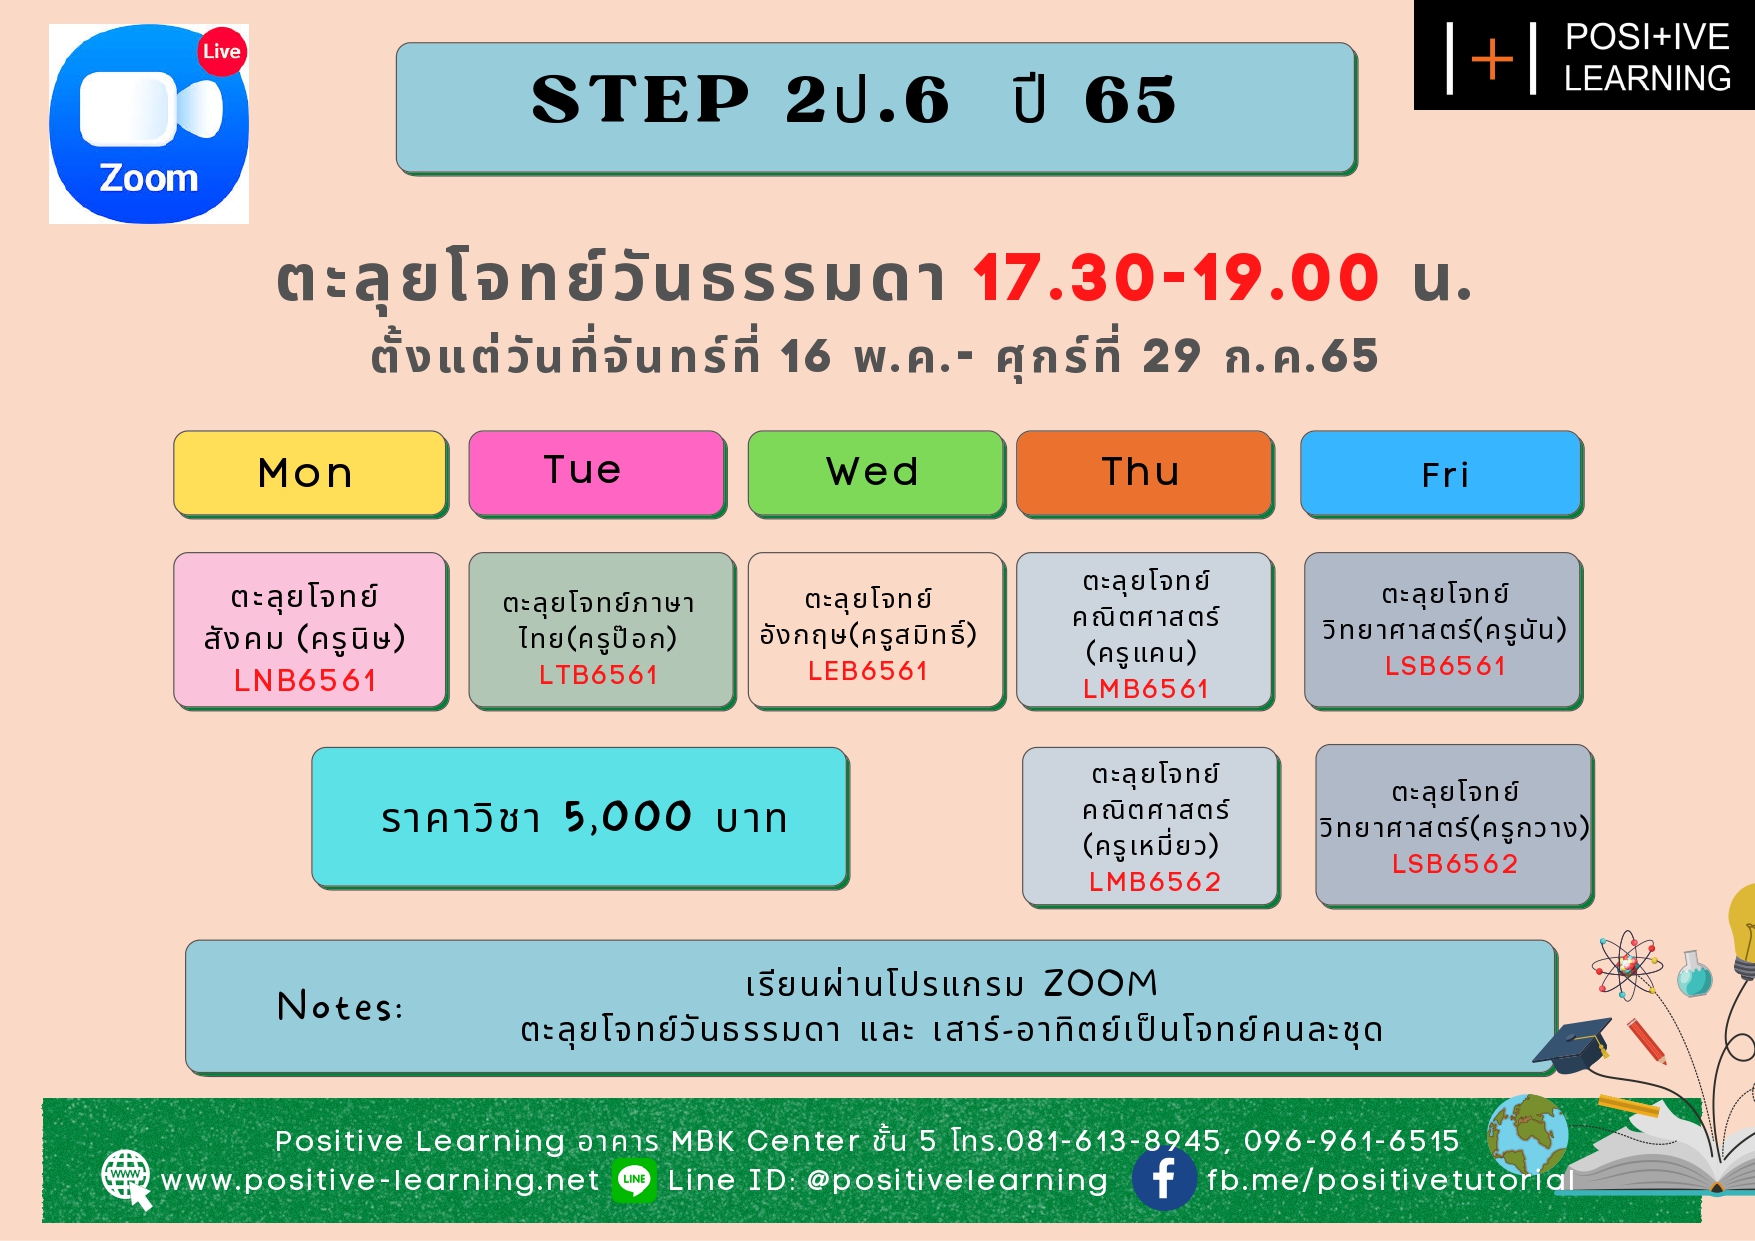 Brochure step 2 ปี 65 Live_page-0001